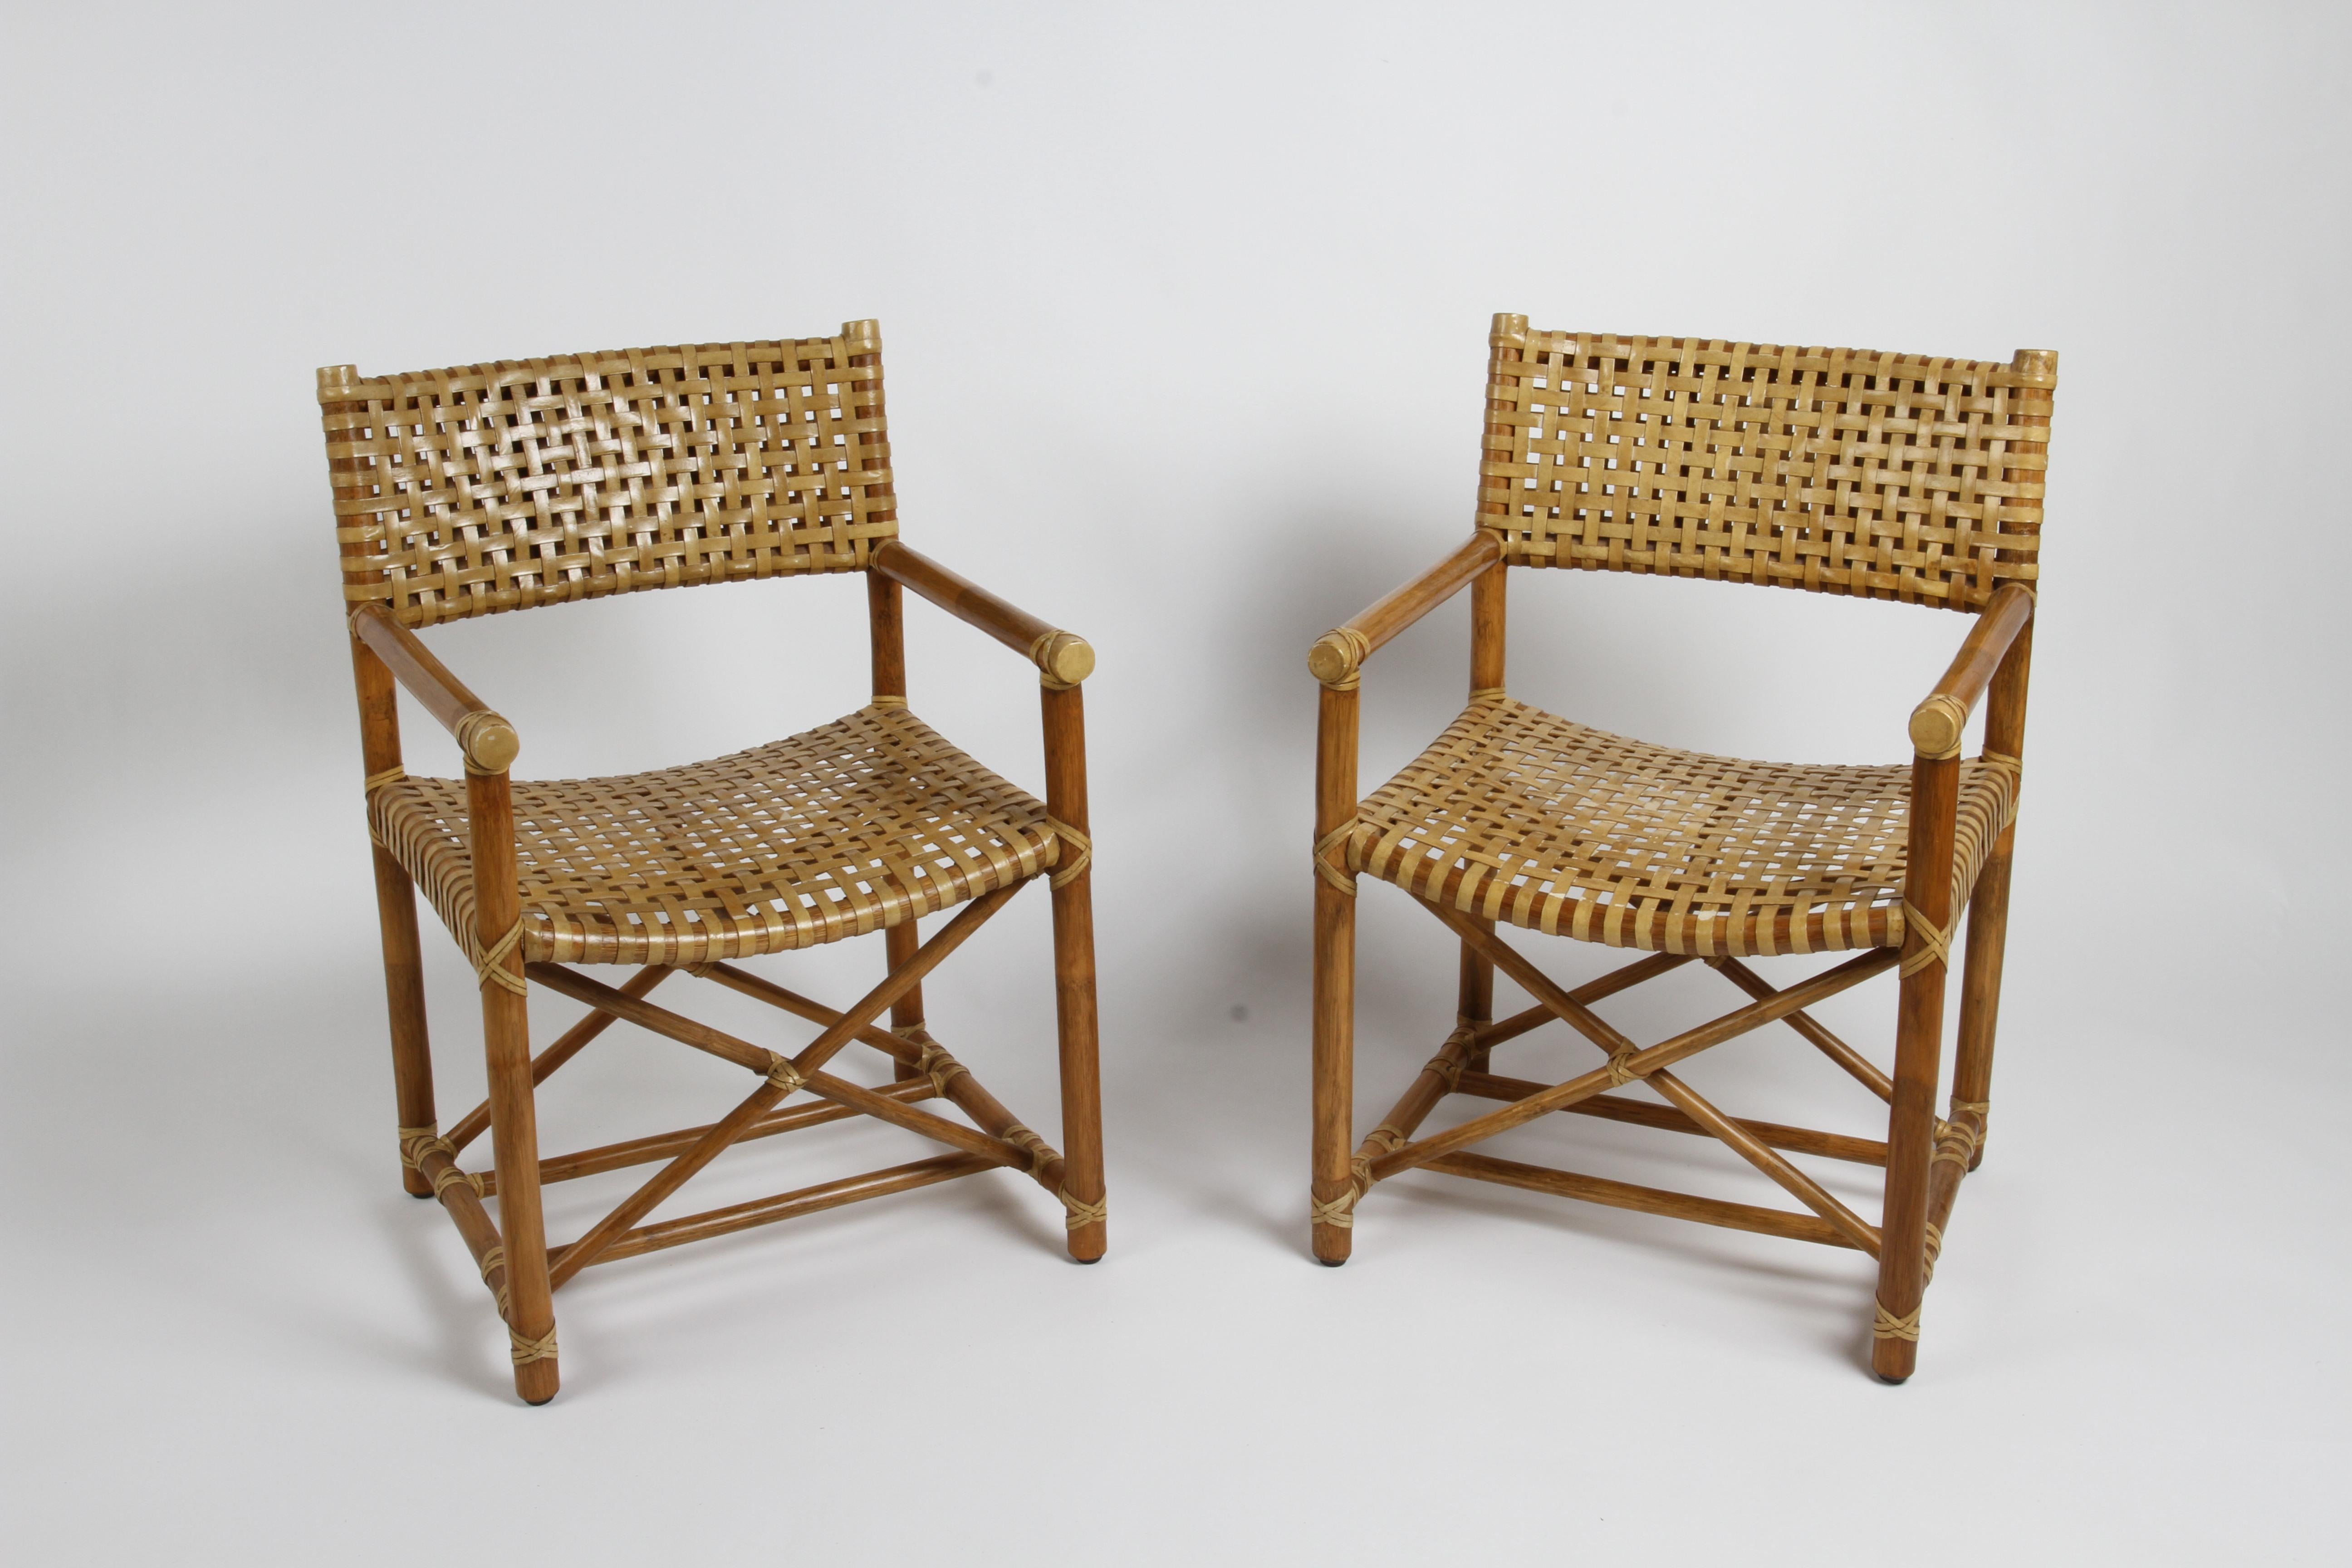 Pair of Classic 1980s directors style McGuire dining or occasional armchairs with lattice style rawhide seats and backs. These rattan framed chairs with backrest and seat woven in rawhide. X-shaped supports held between legs with lower stretcher.